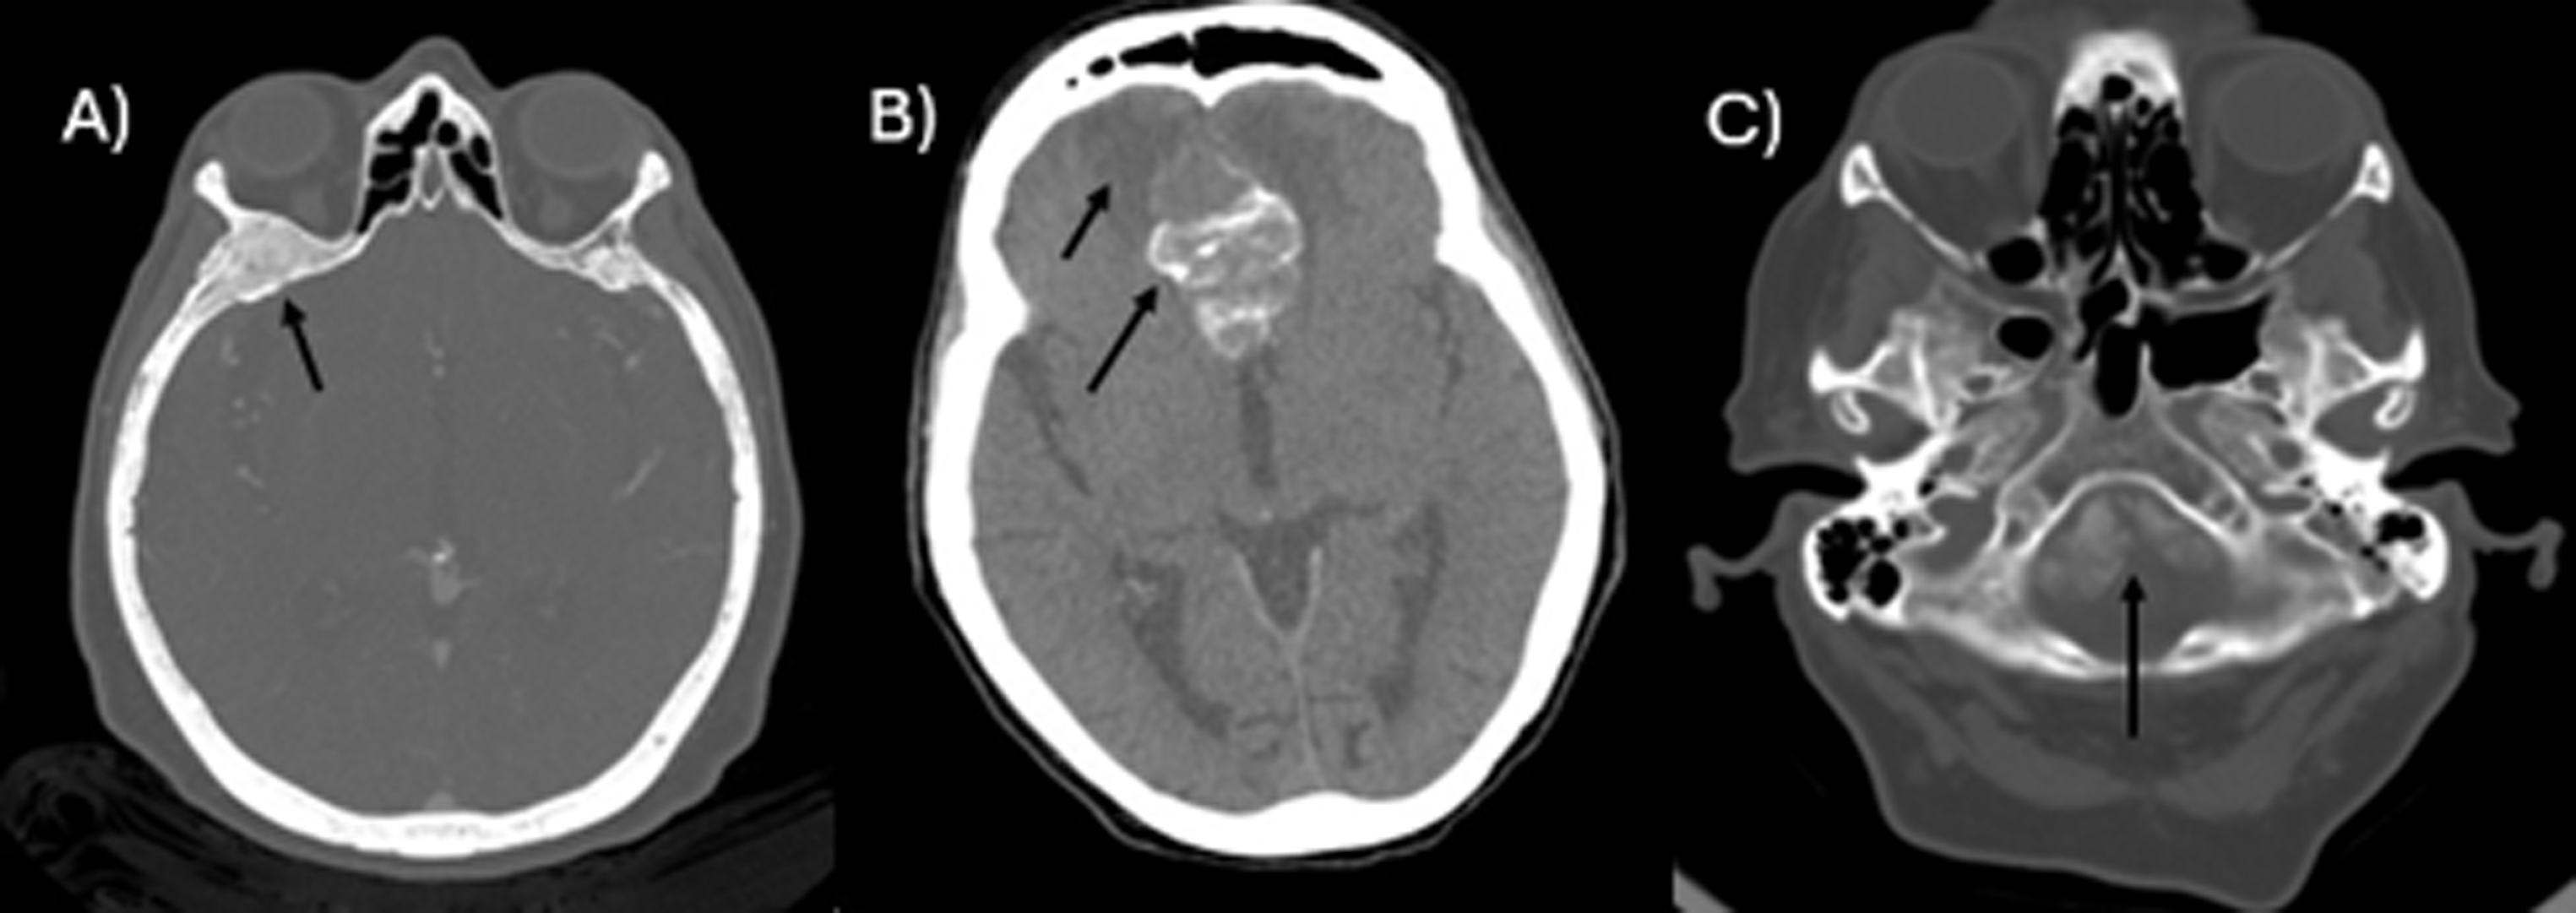 Neuroradiological features of patients with bilateral macronodular adrenocortical disease and meningiomas associated or not with genetic variants of ARMC5– a case series